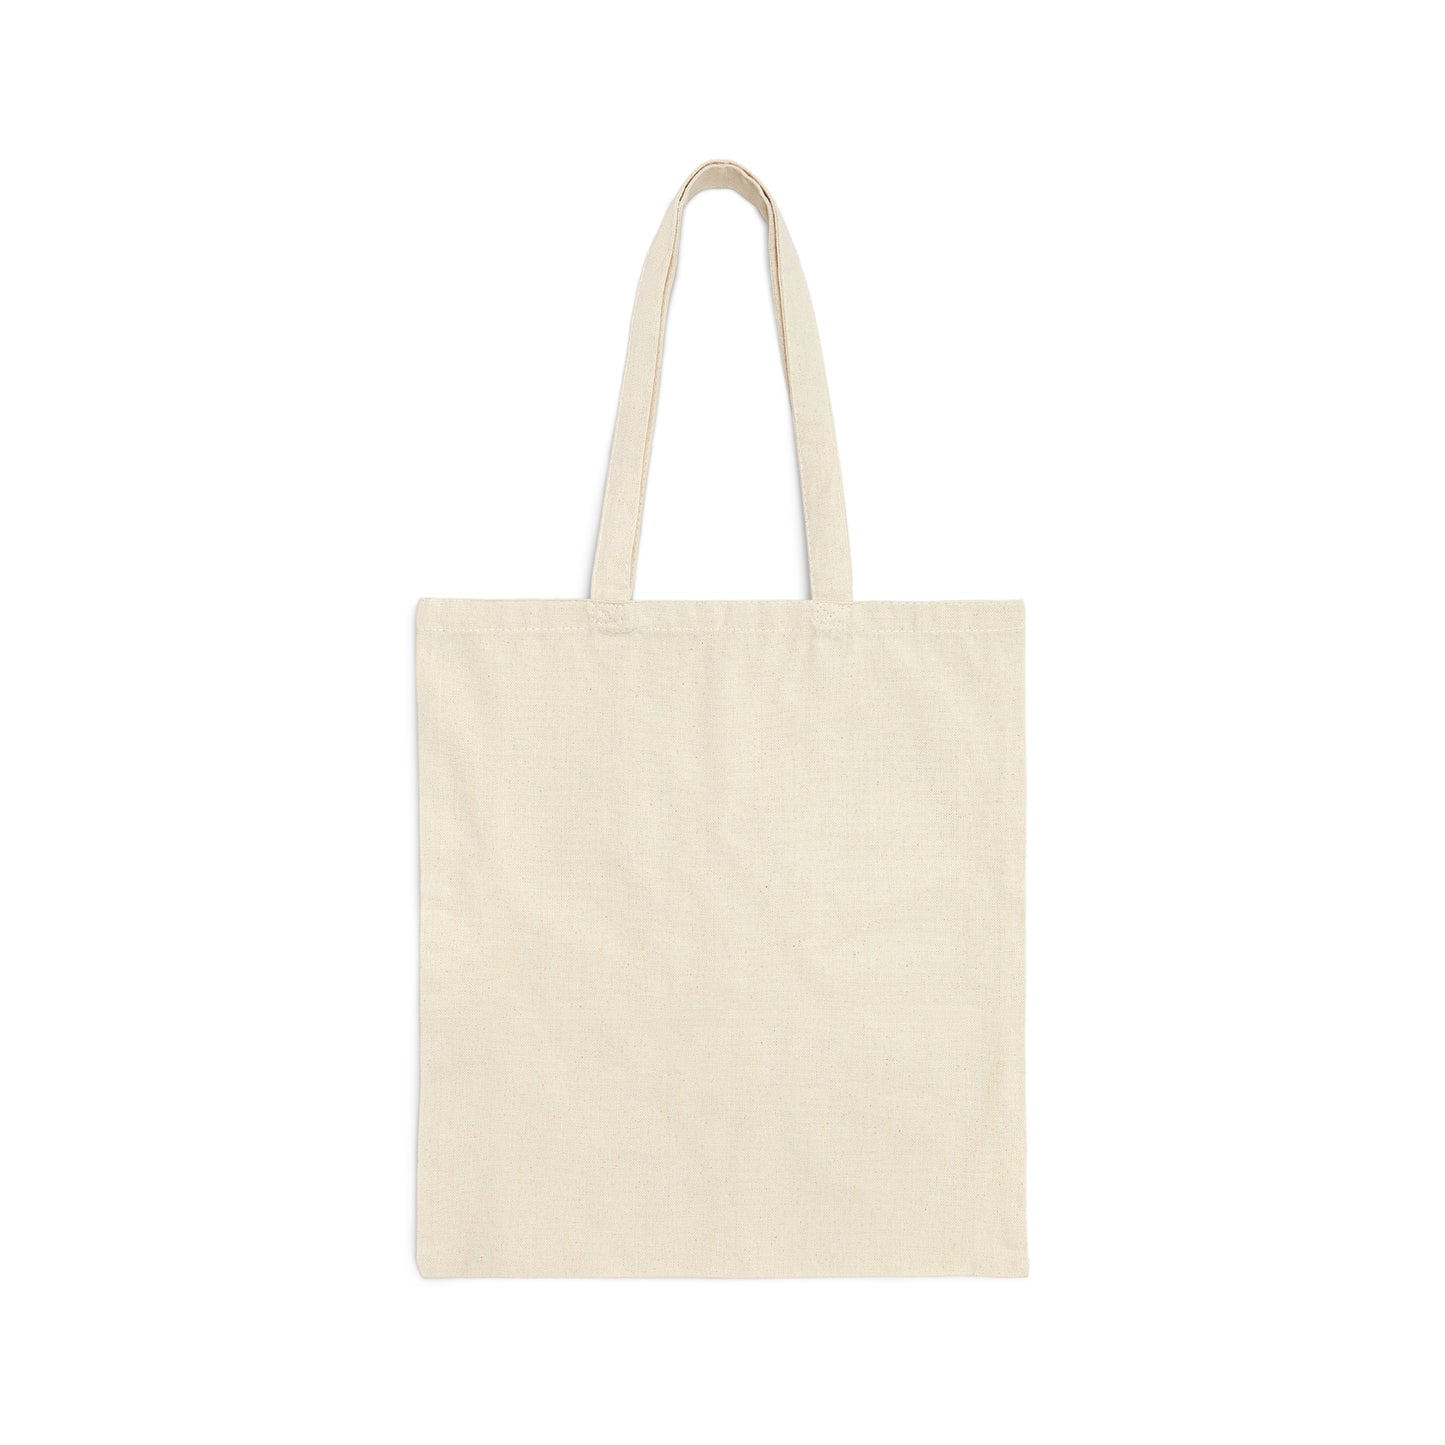 Never Forget Tote